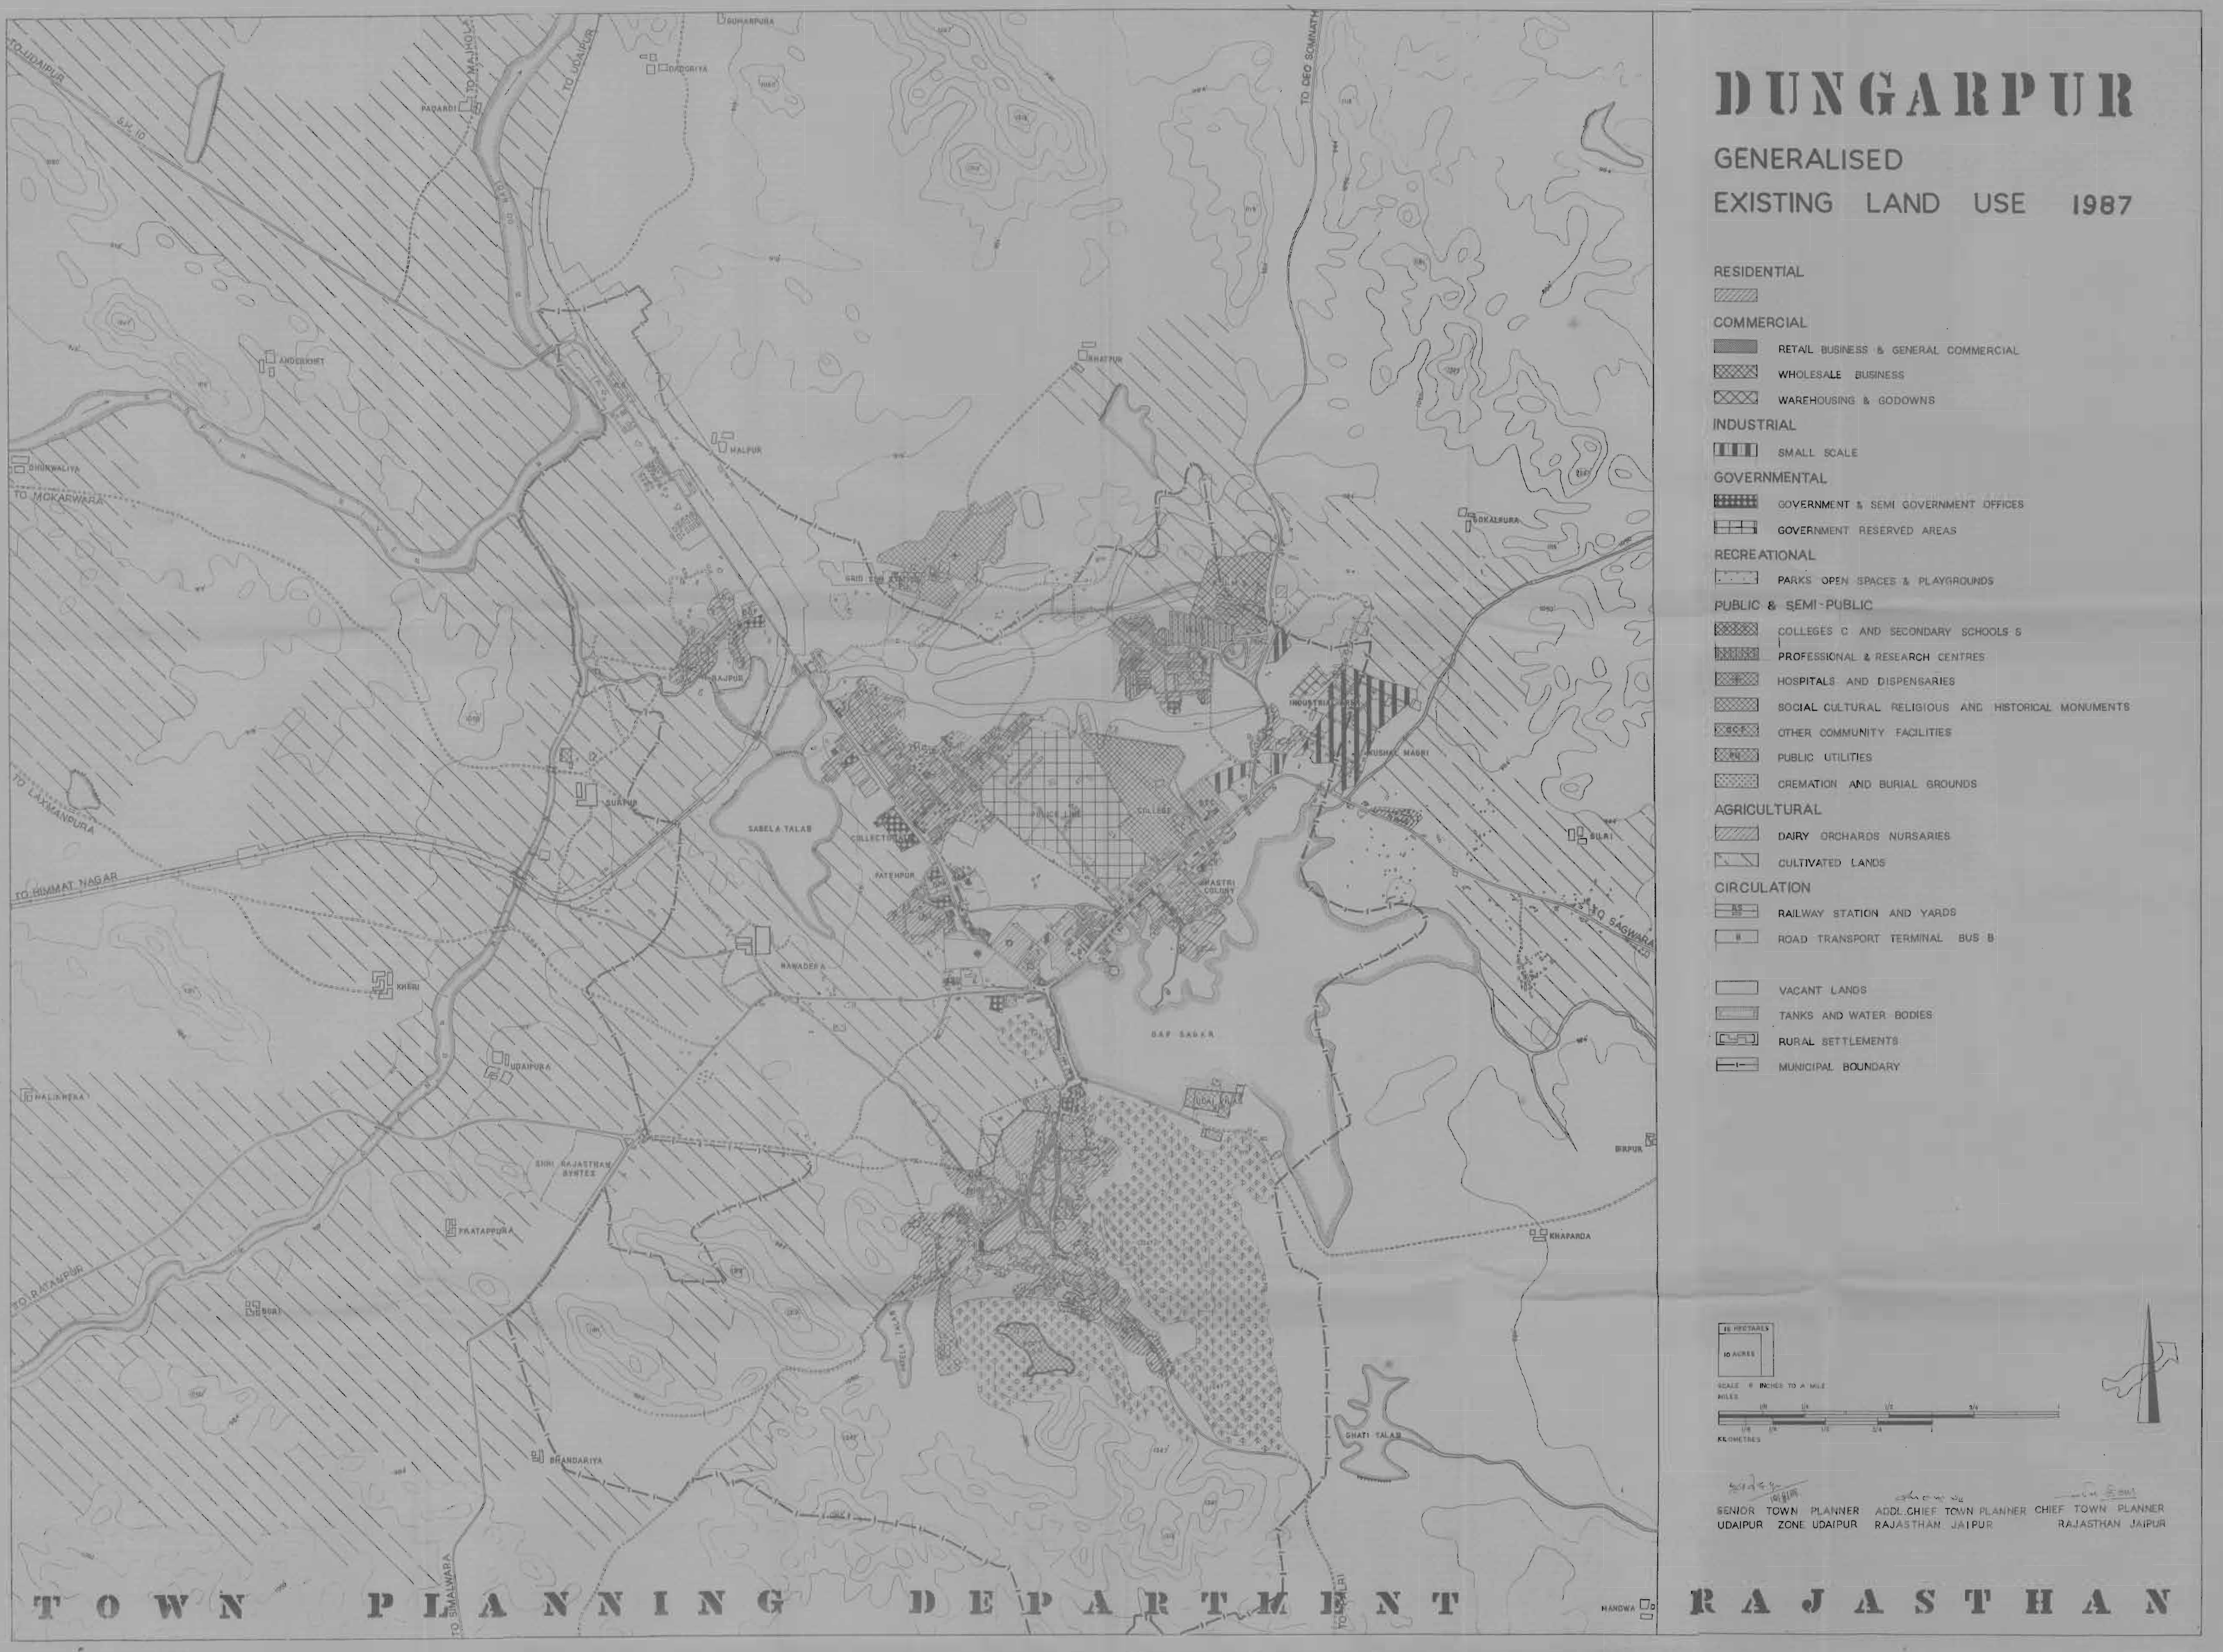 Dungarpur Existing Land Use Map 1987